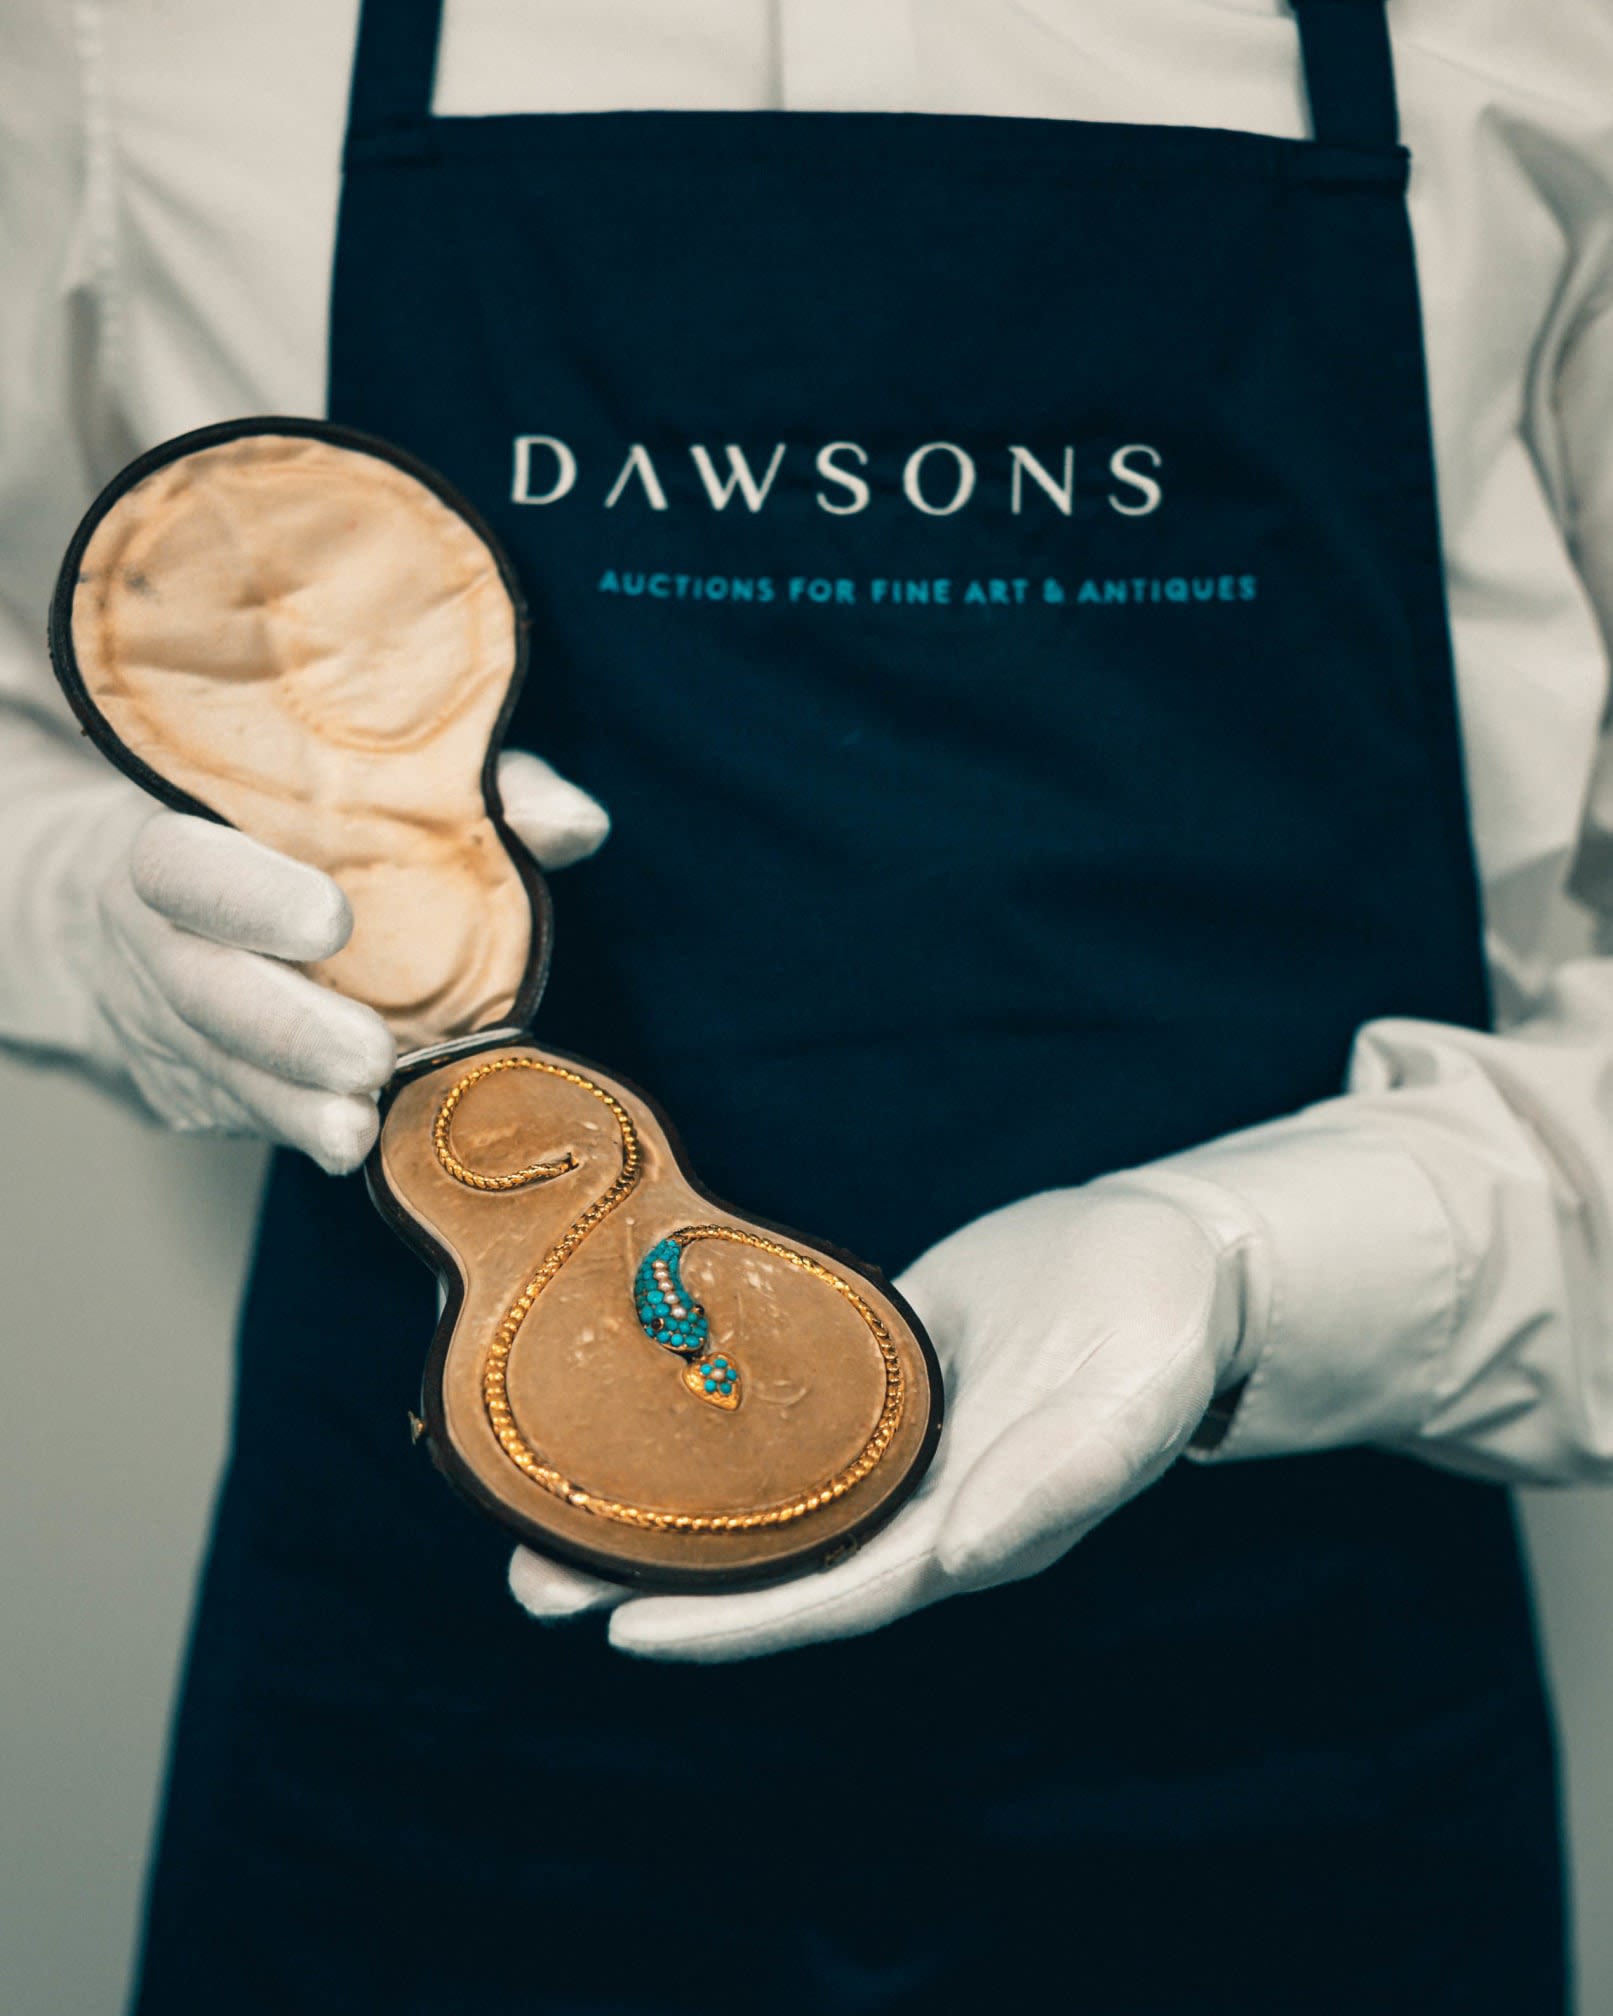 Images Dawson's Auctioneers & Valuers